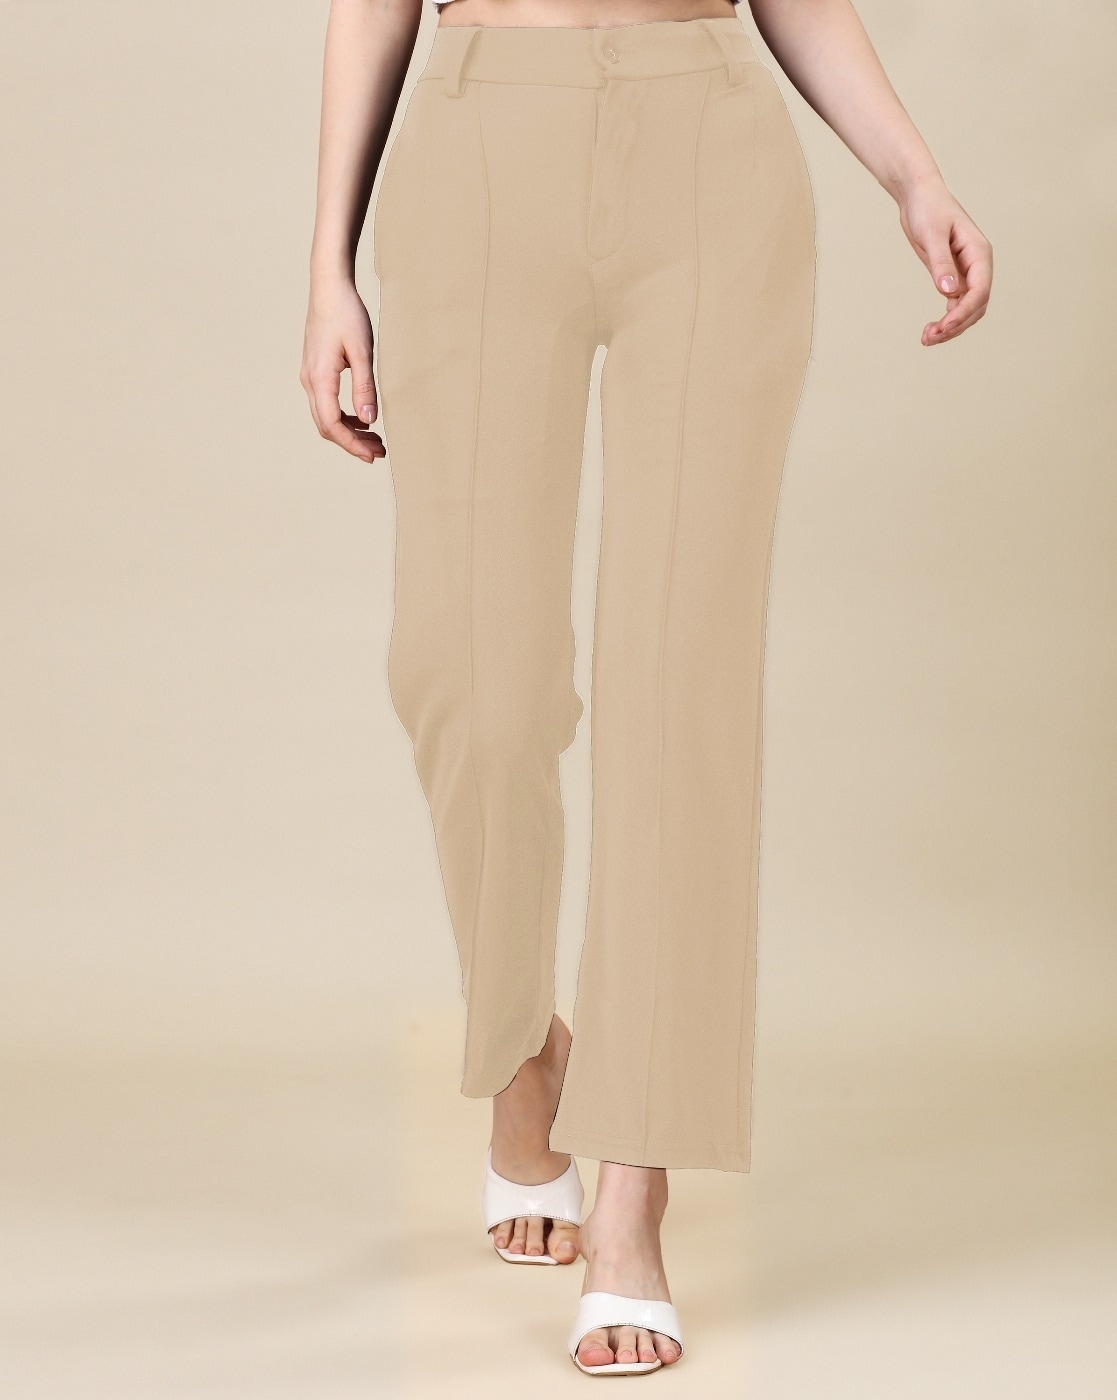 WOMEN'S COTTON BAGGY TROUSERS | UNIQLO IN